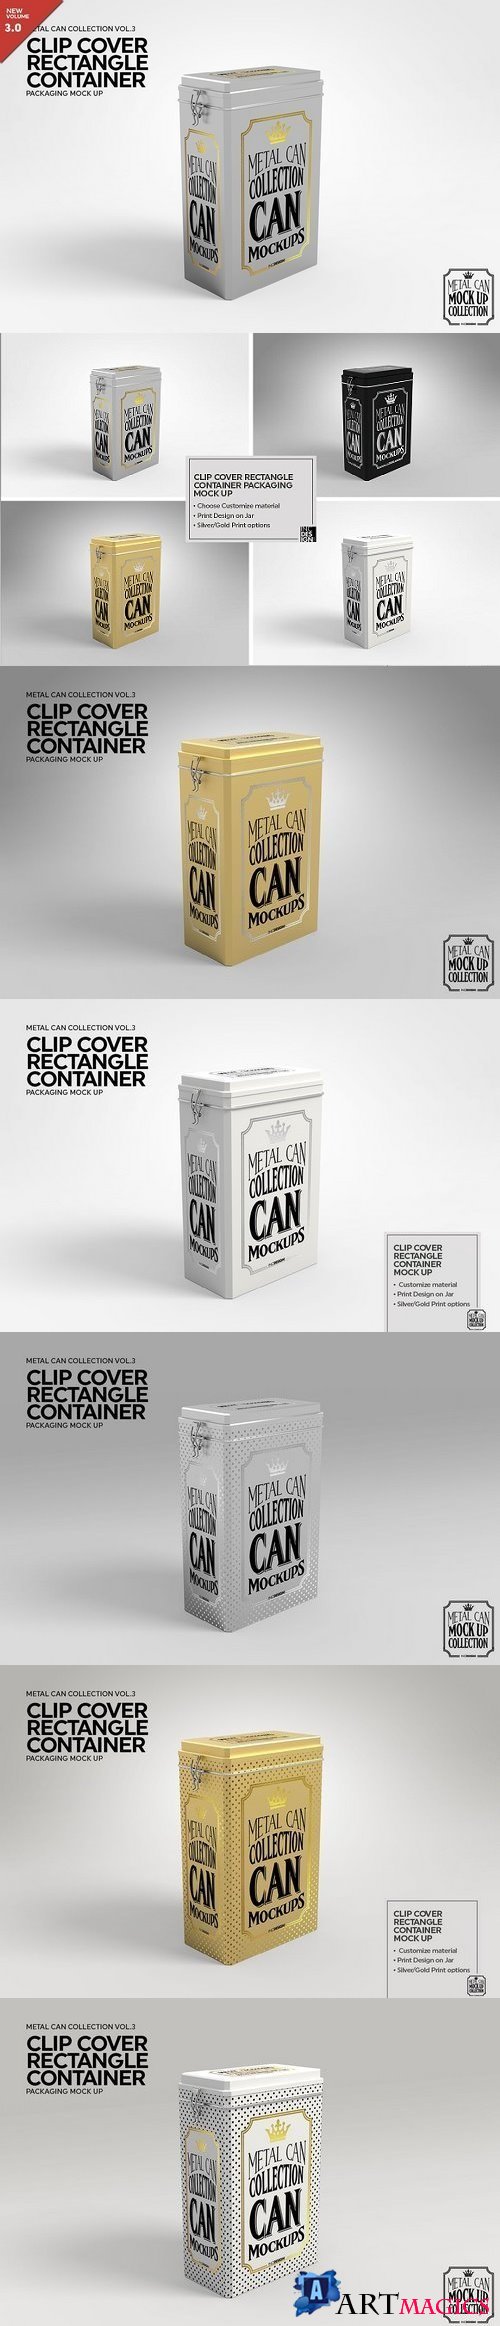 ClipCover Rectangle Container MockUp 1929519